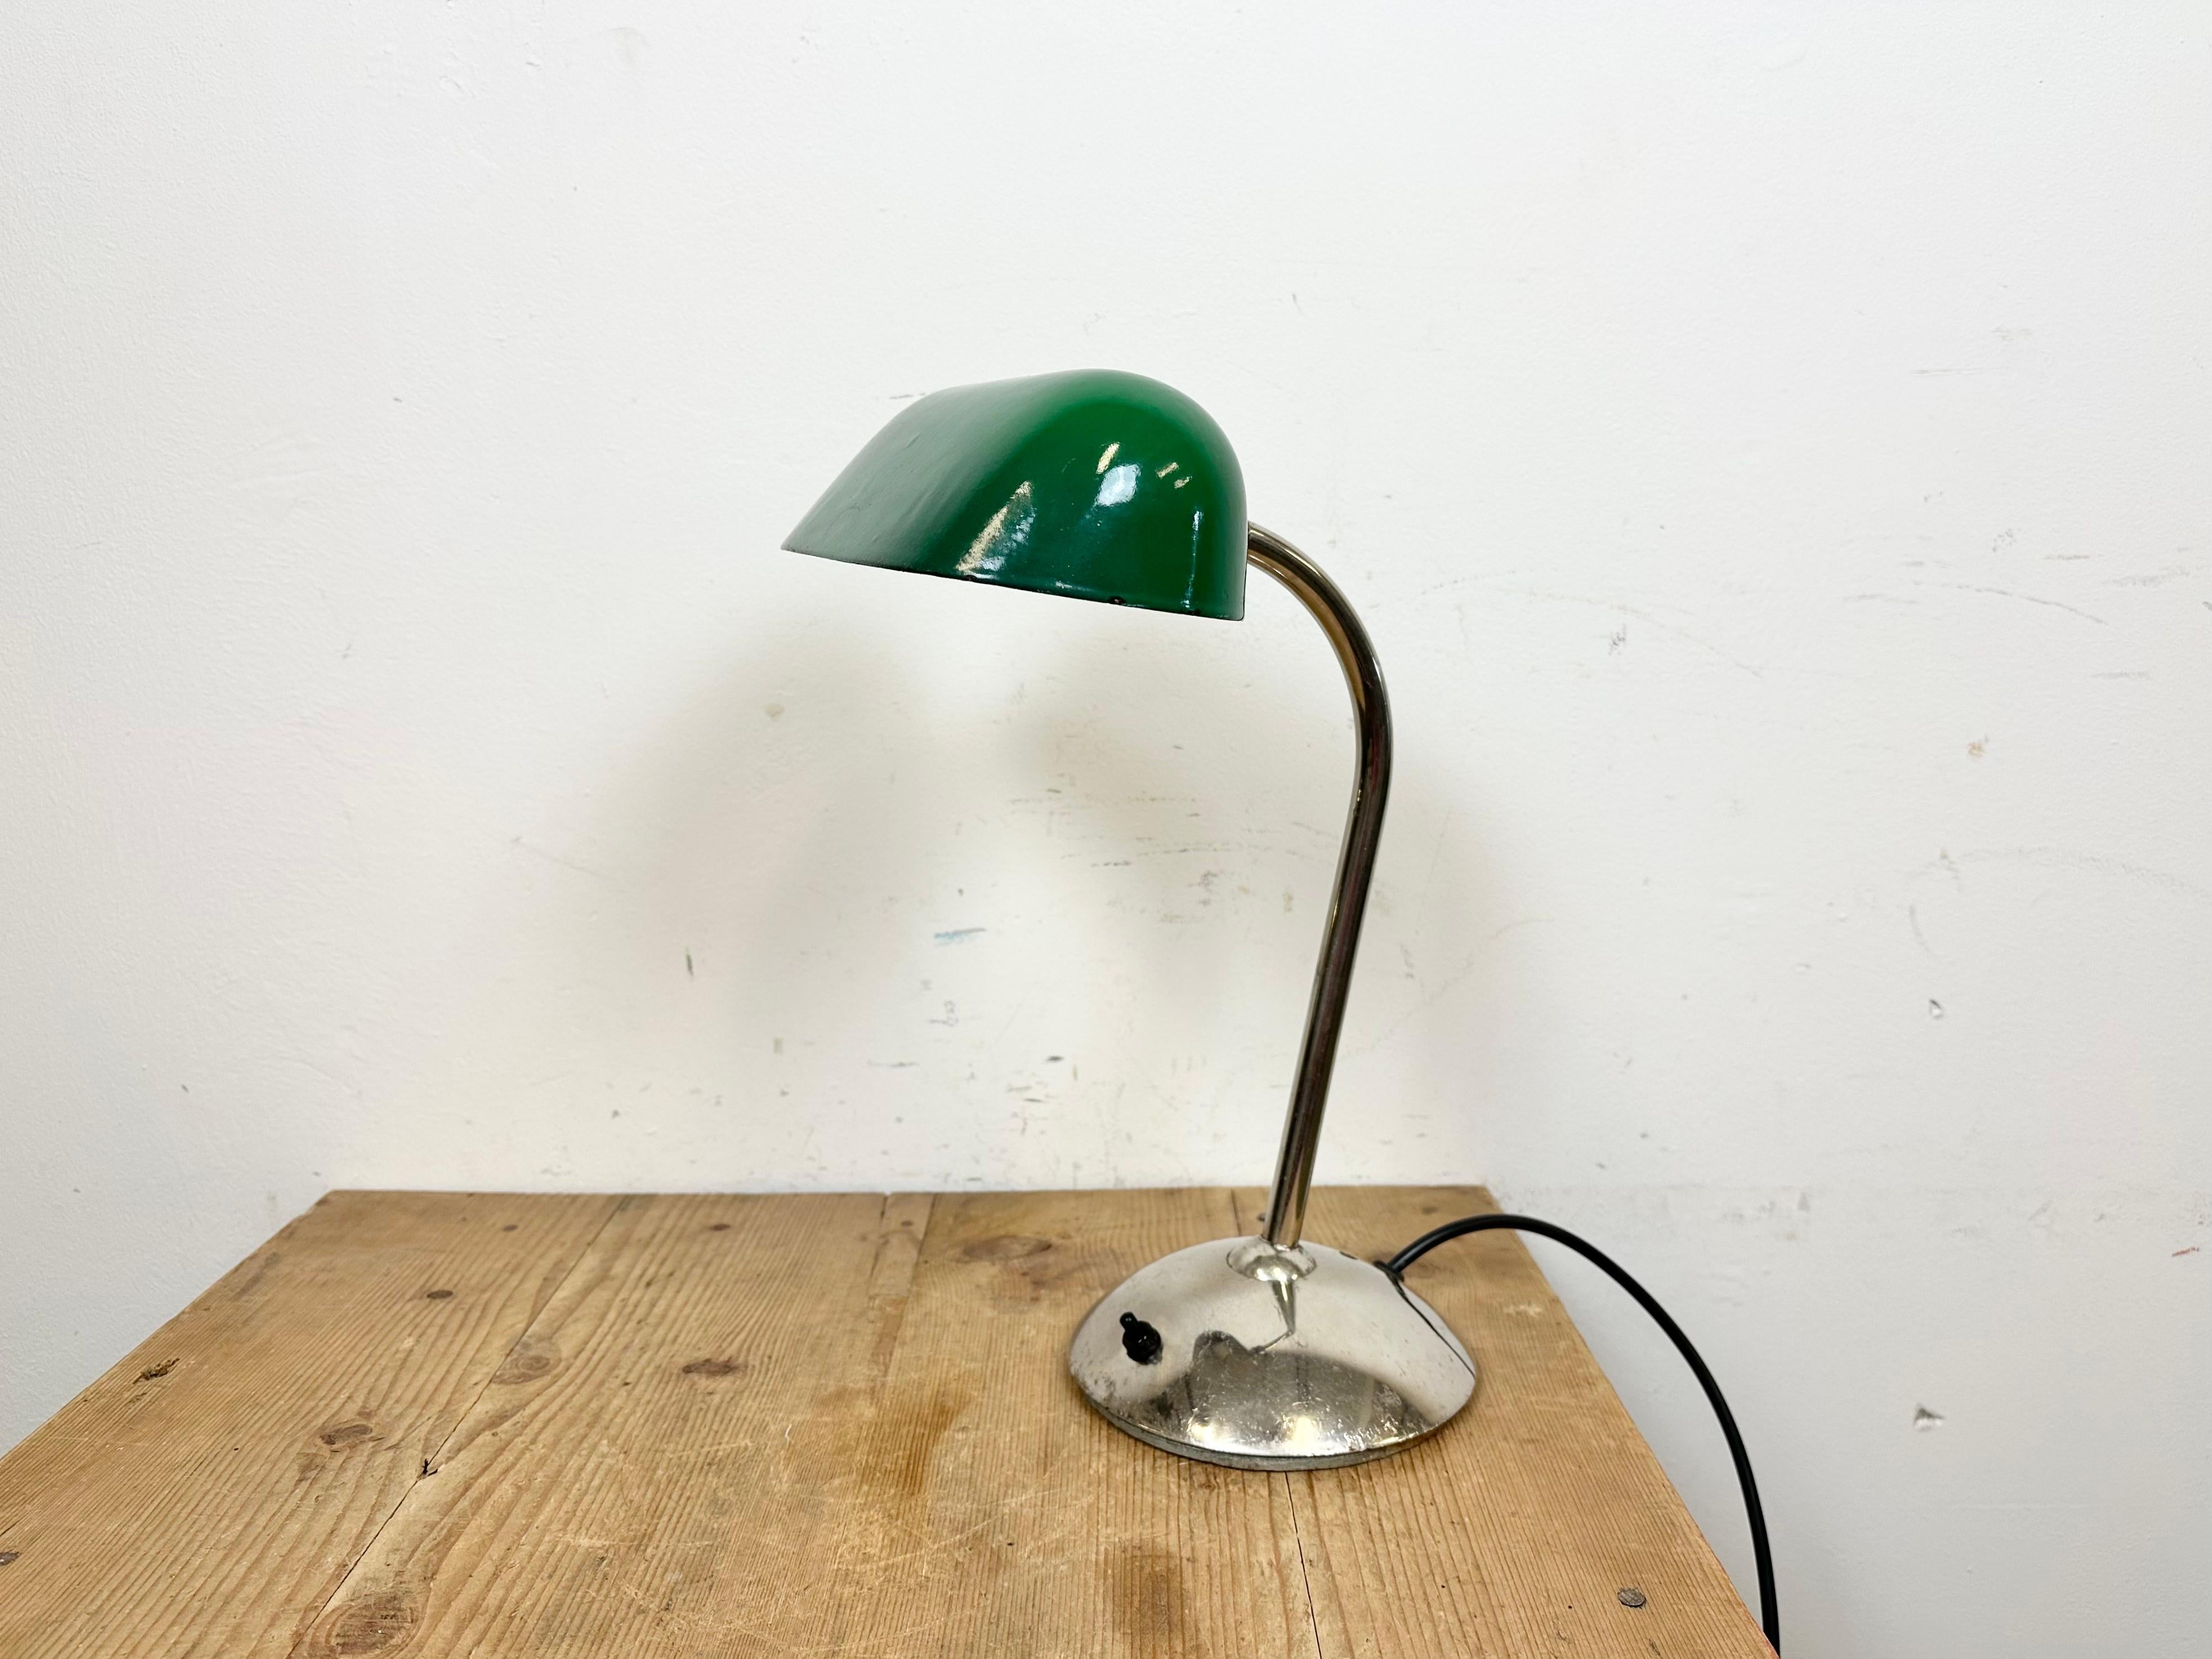 This green table lamp was made in former Czechoslovakia during the 1950s. It features a green enamel shade with a white enamel interior and a chrome plated iron base and arm with two adjustable joints. Original porcelain socket requires E 27/ E 26